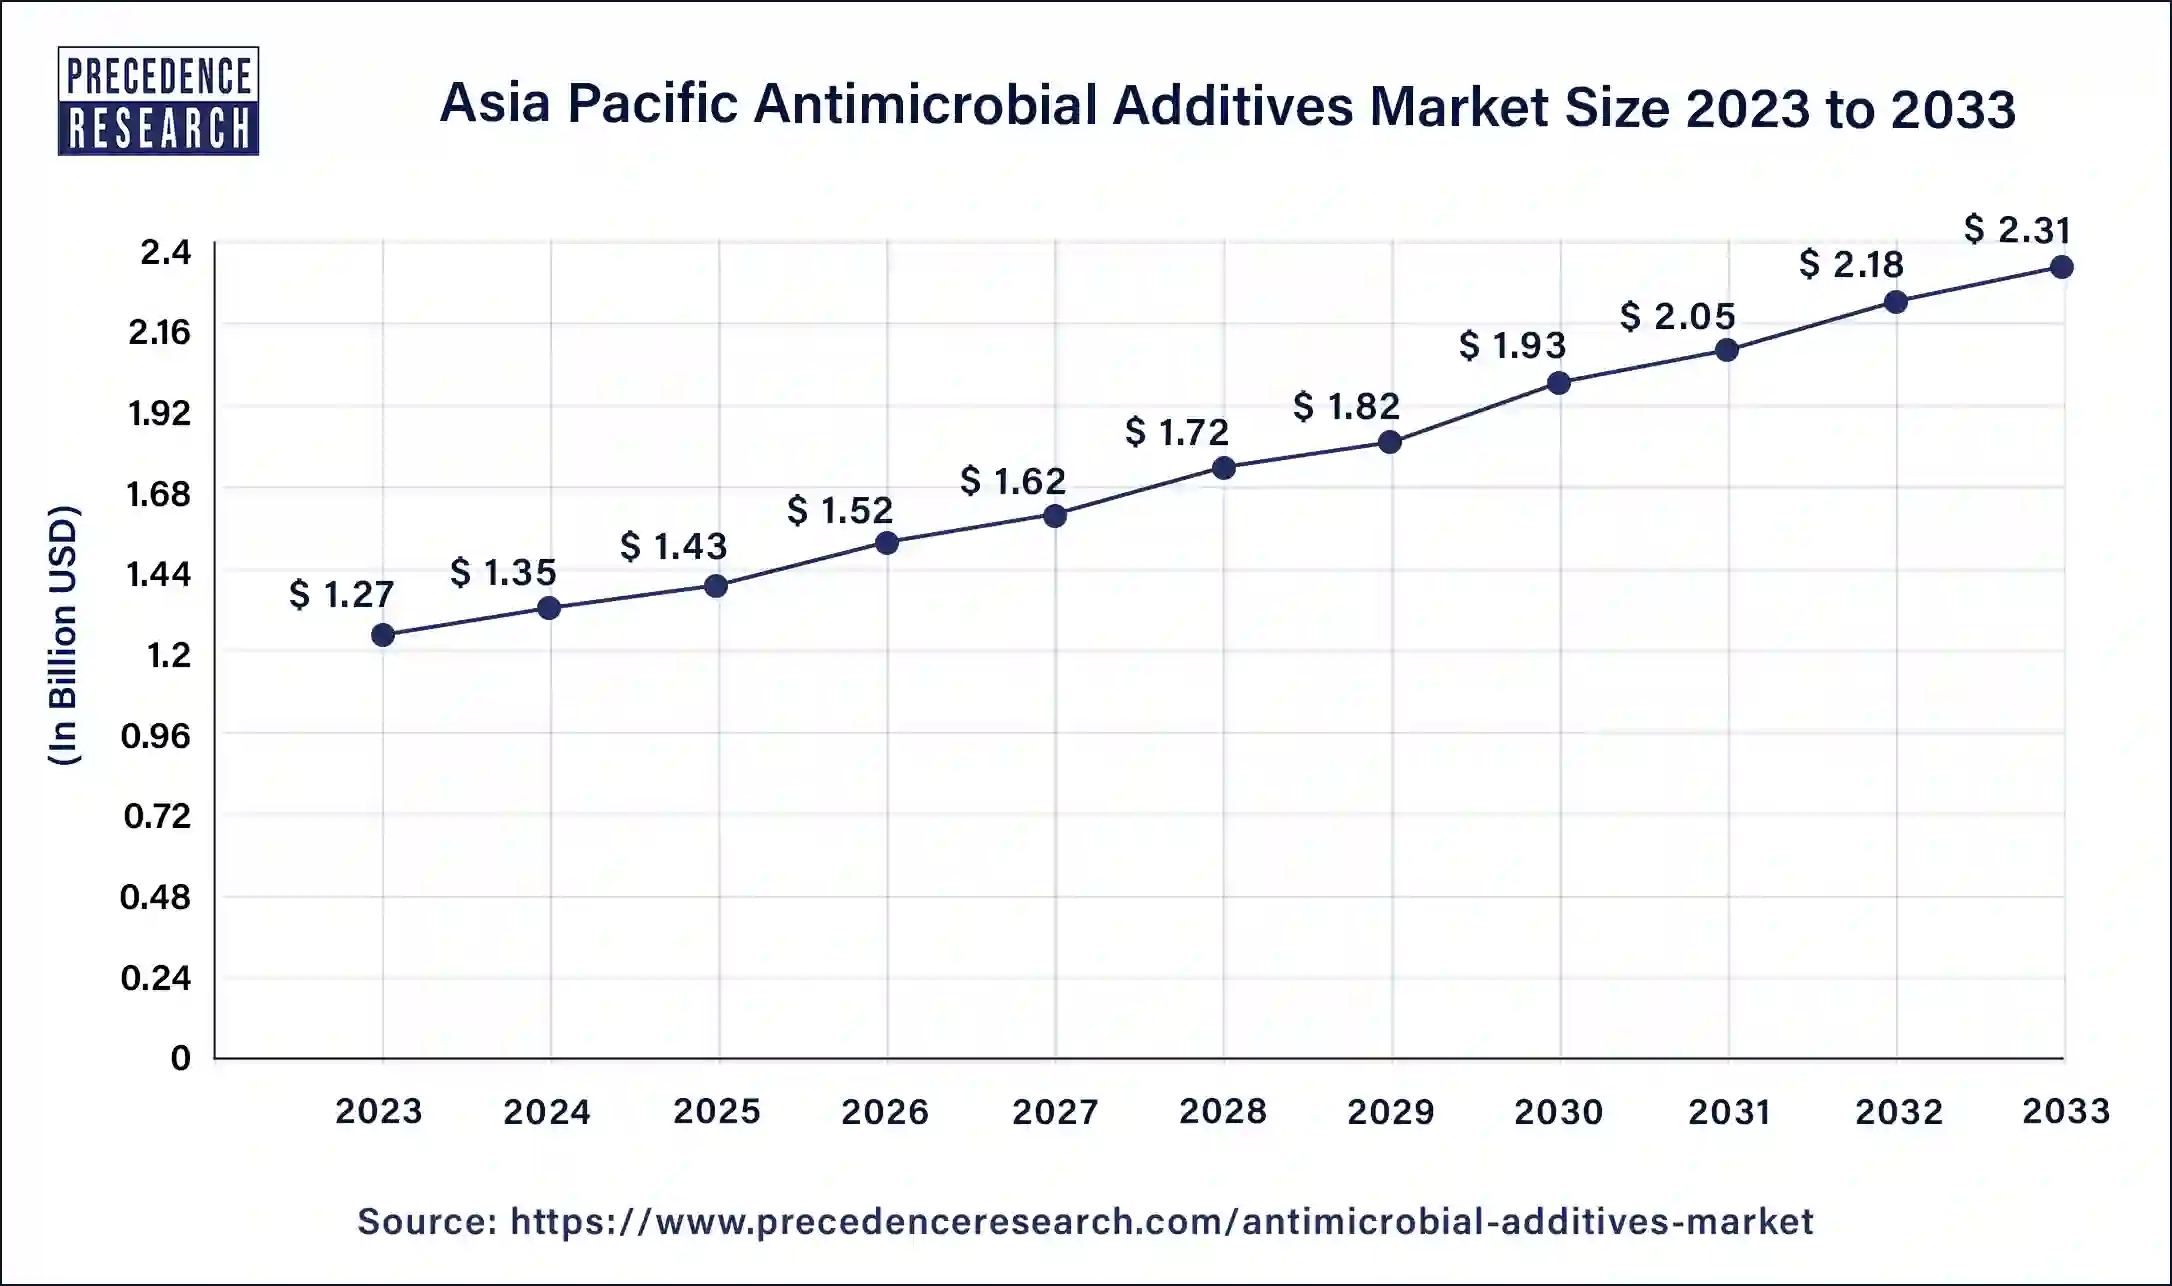 Asia Pacific Antimicrobial Additives Market Size 2024 to 2033